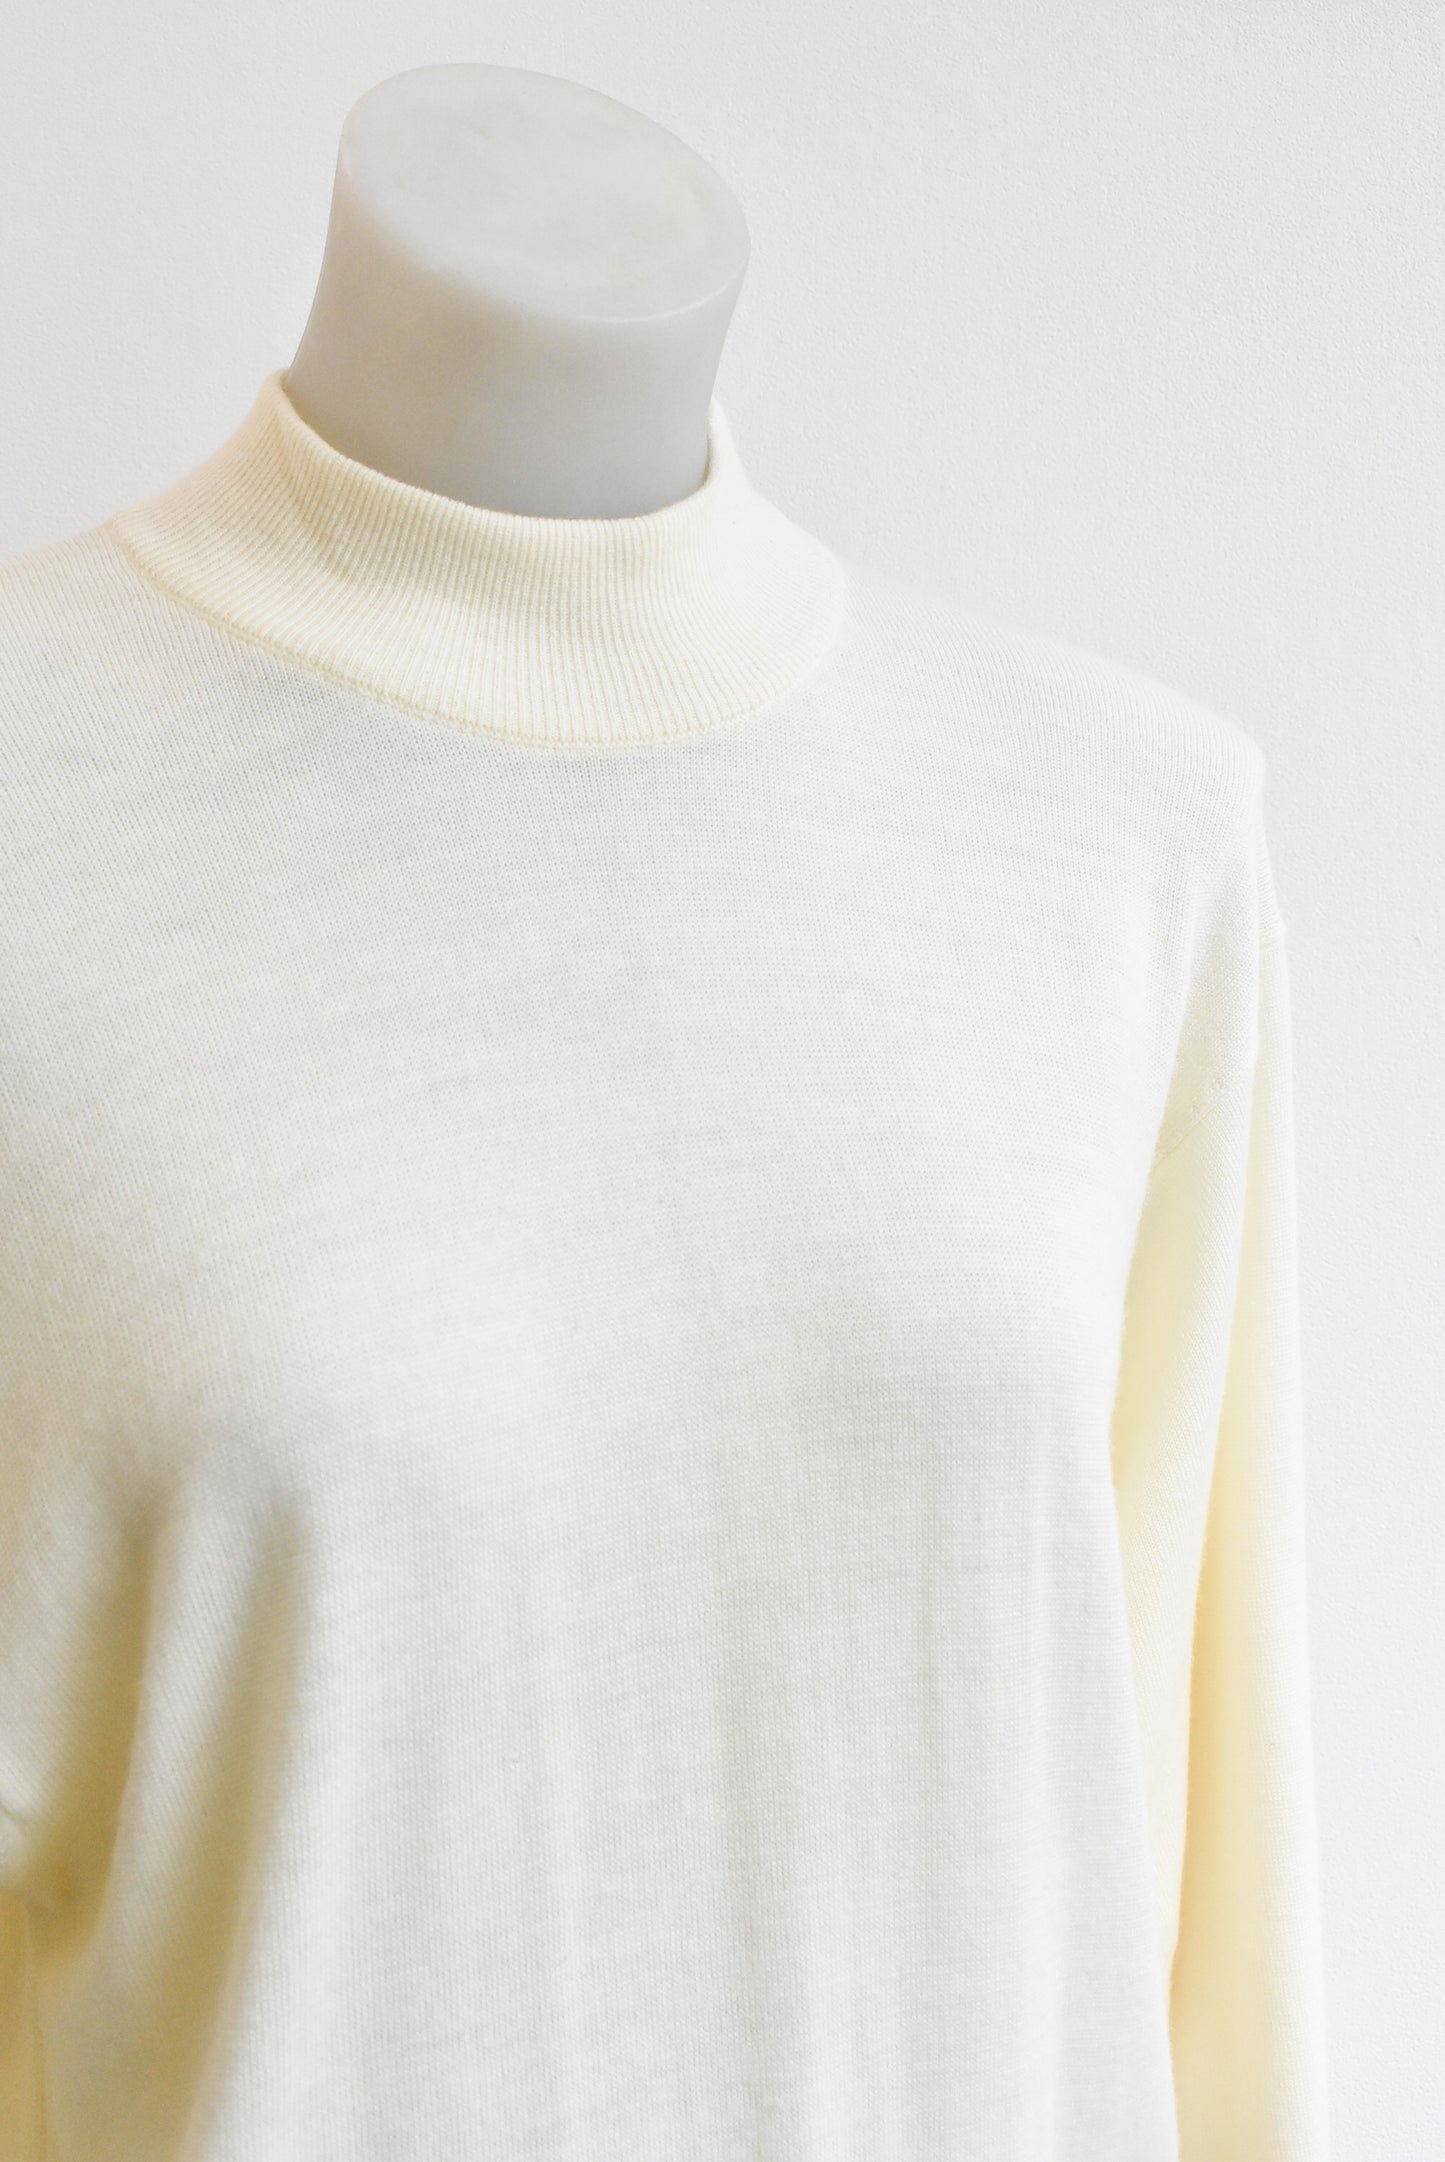 Ivory coloured sweater, size S-M